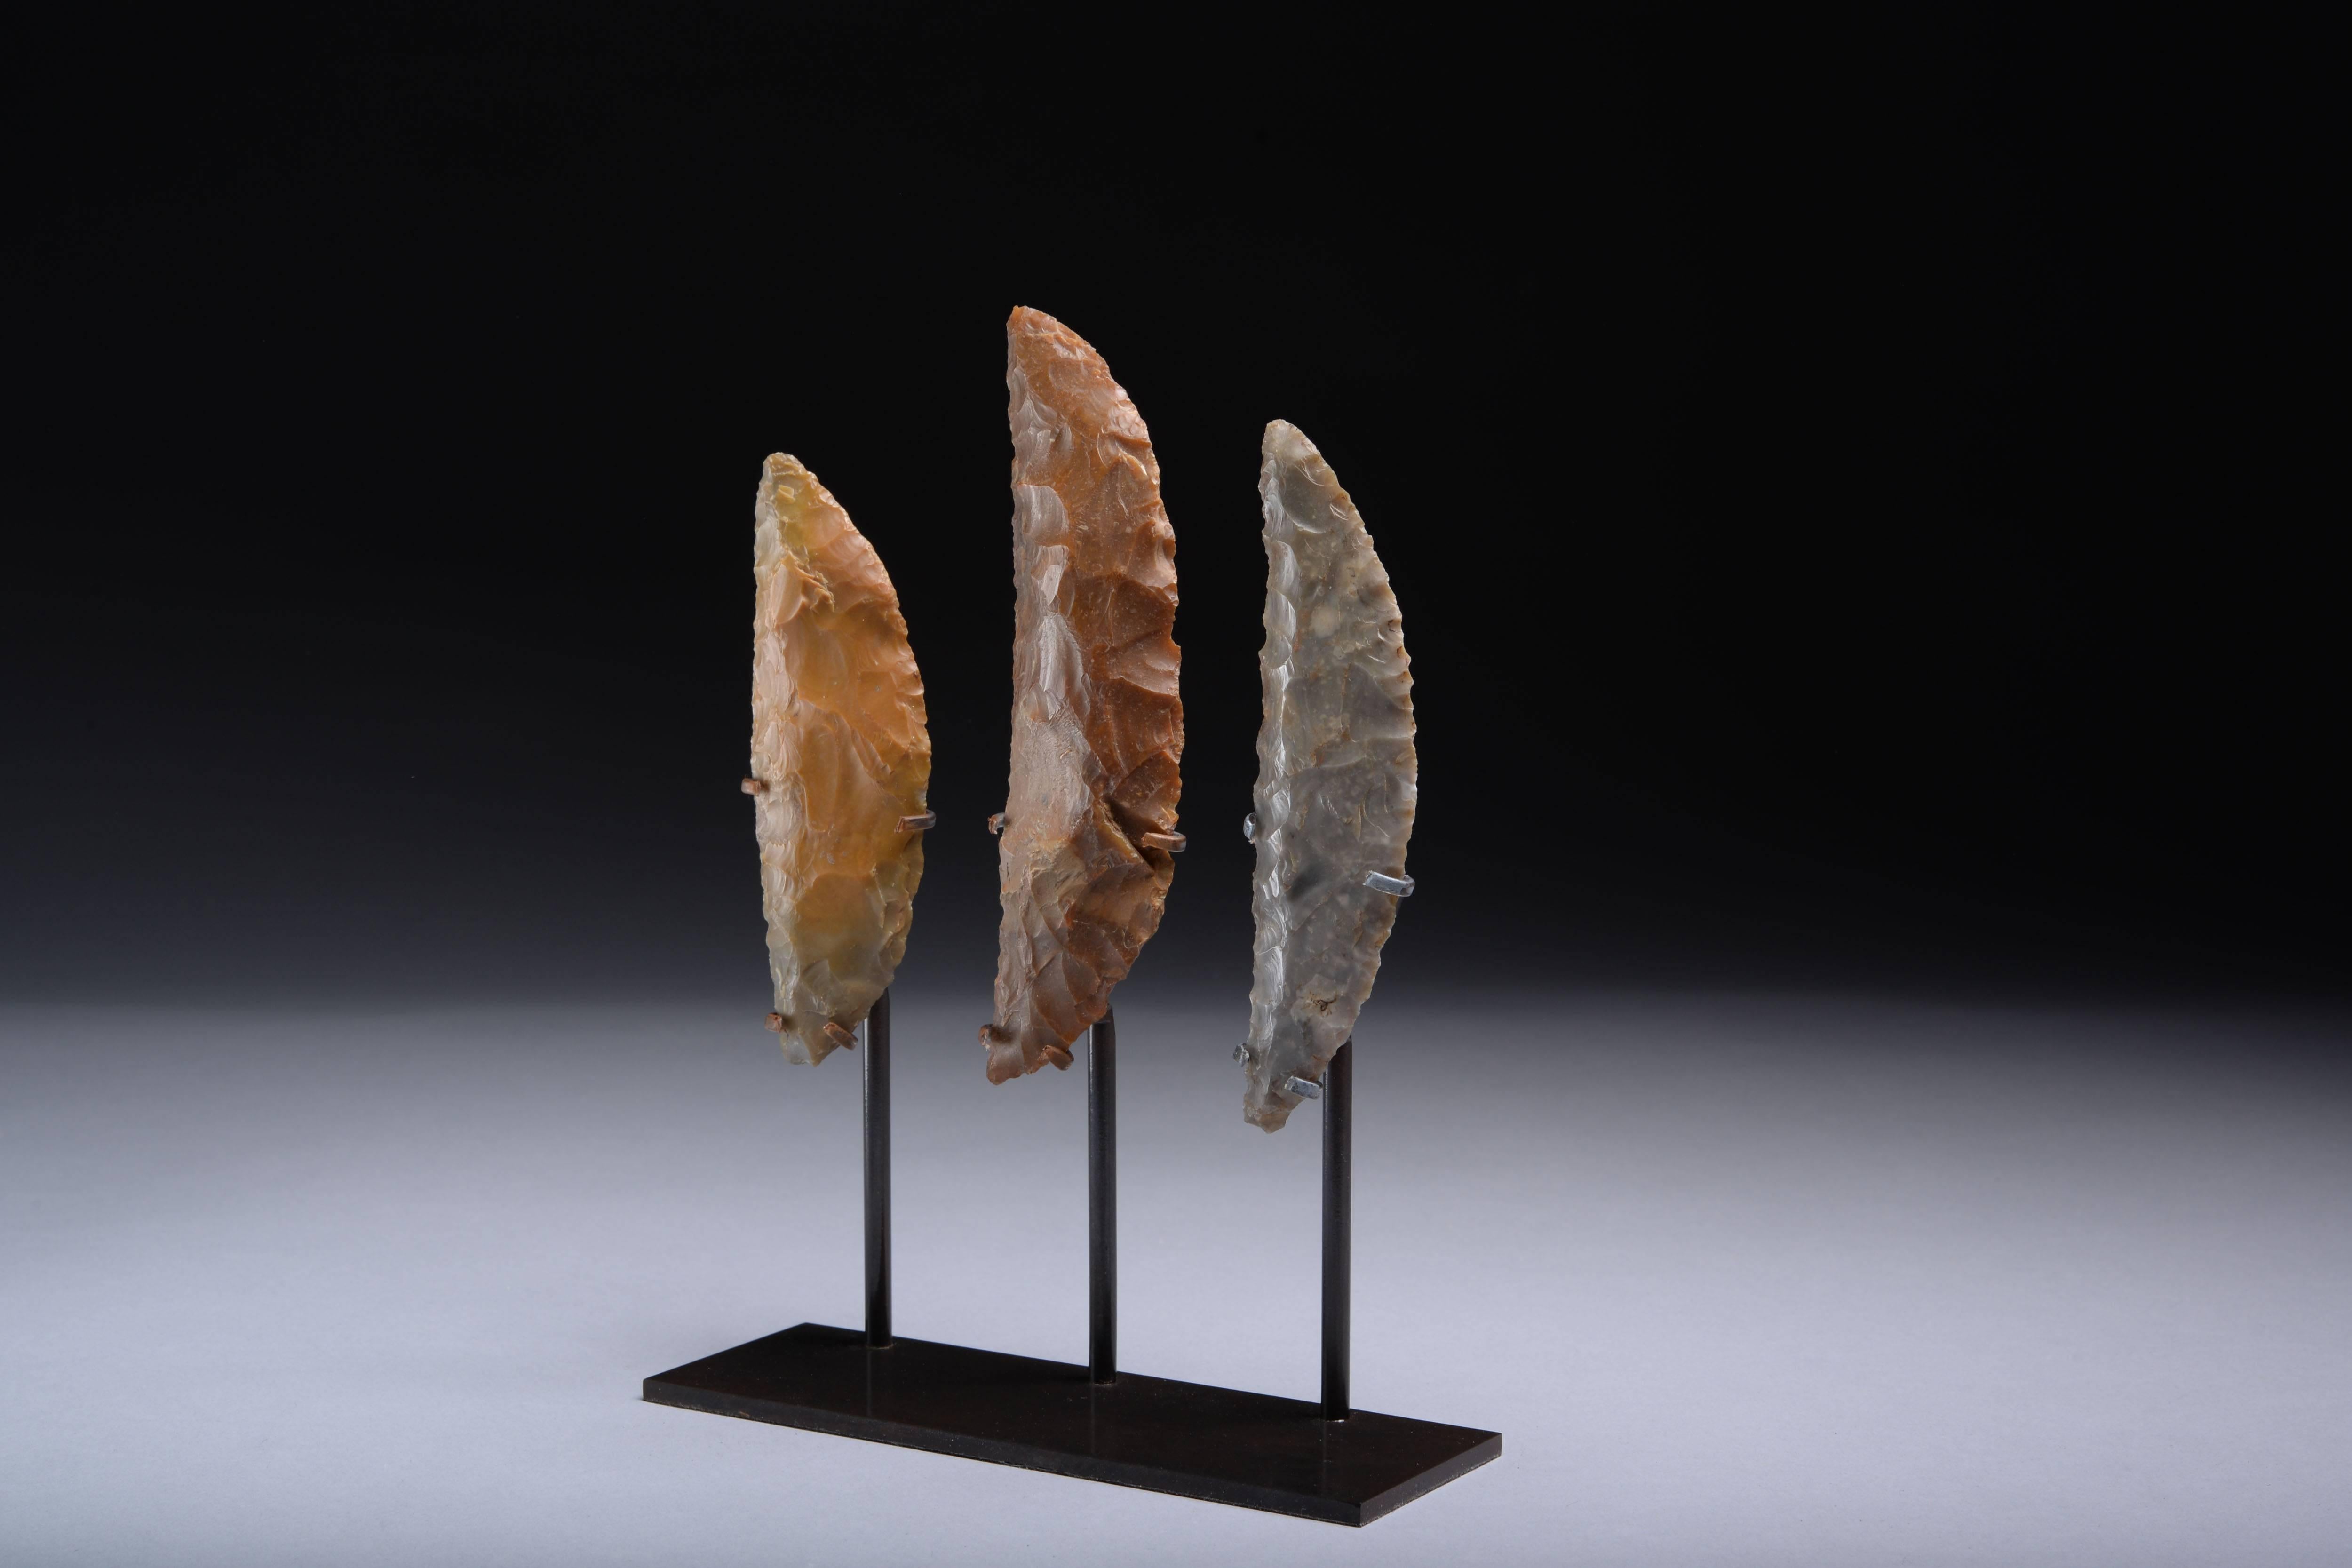 A collection of three Scandinavian Neolithic sickle blades, dating to around 2000 BC.

Of typical form, two examples knapped from caramel coloured flint, the third from a pleasing grey flint. Chipped with meticulous care and precision to produce